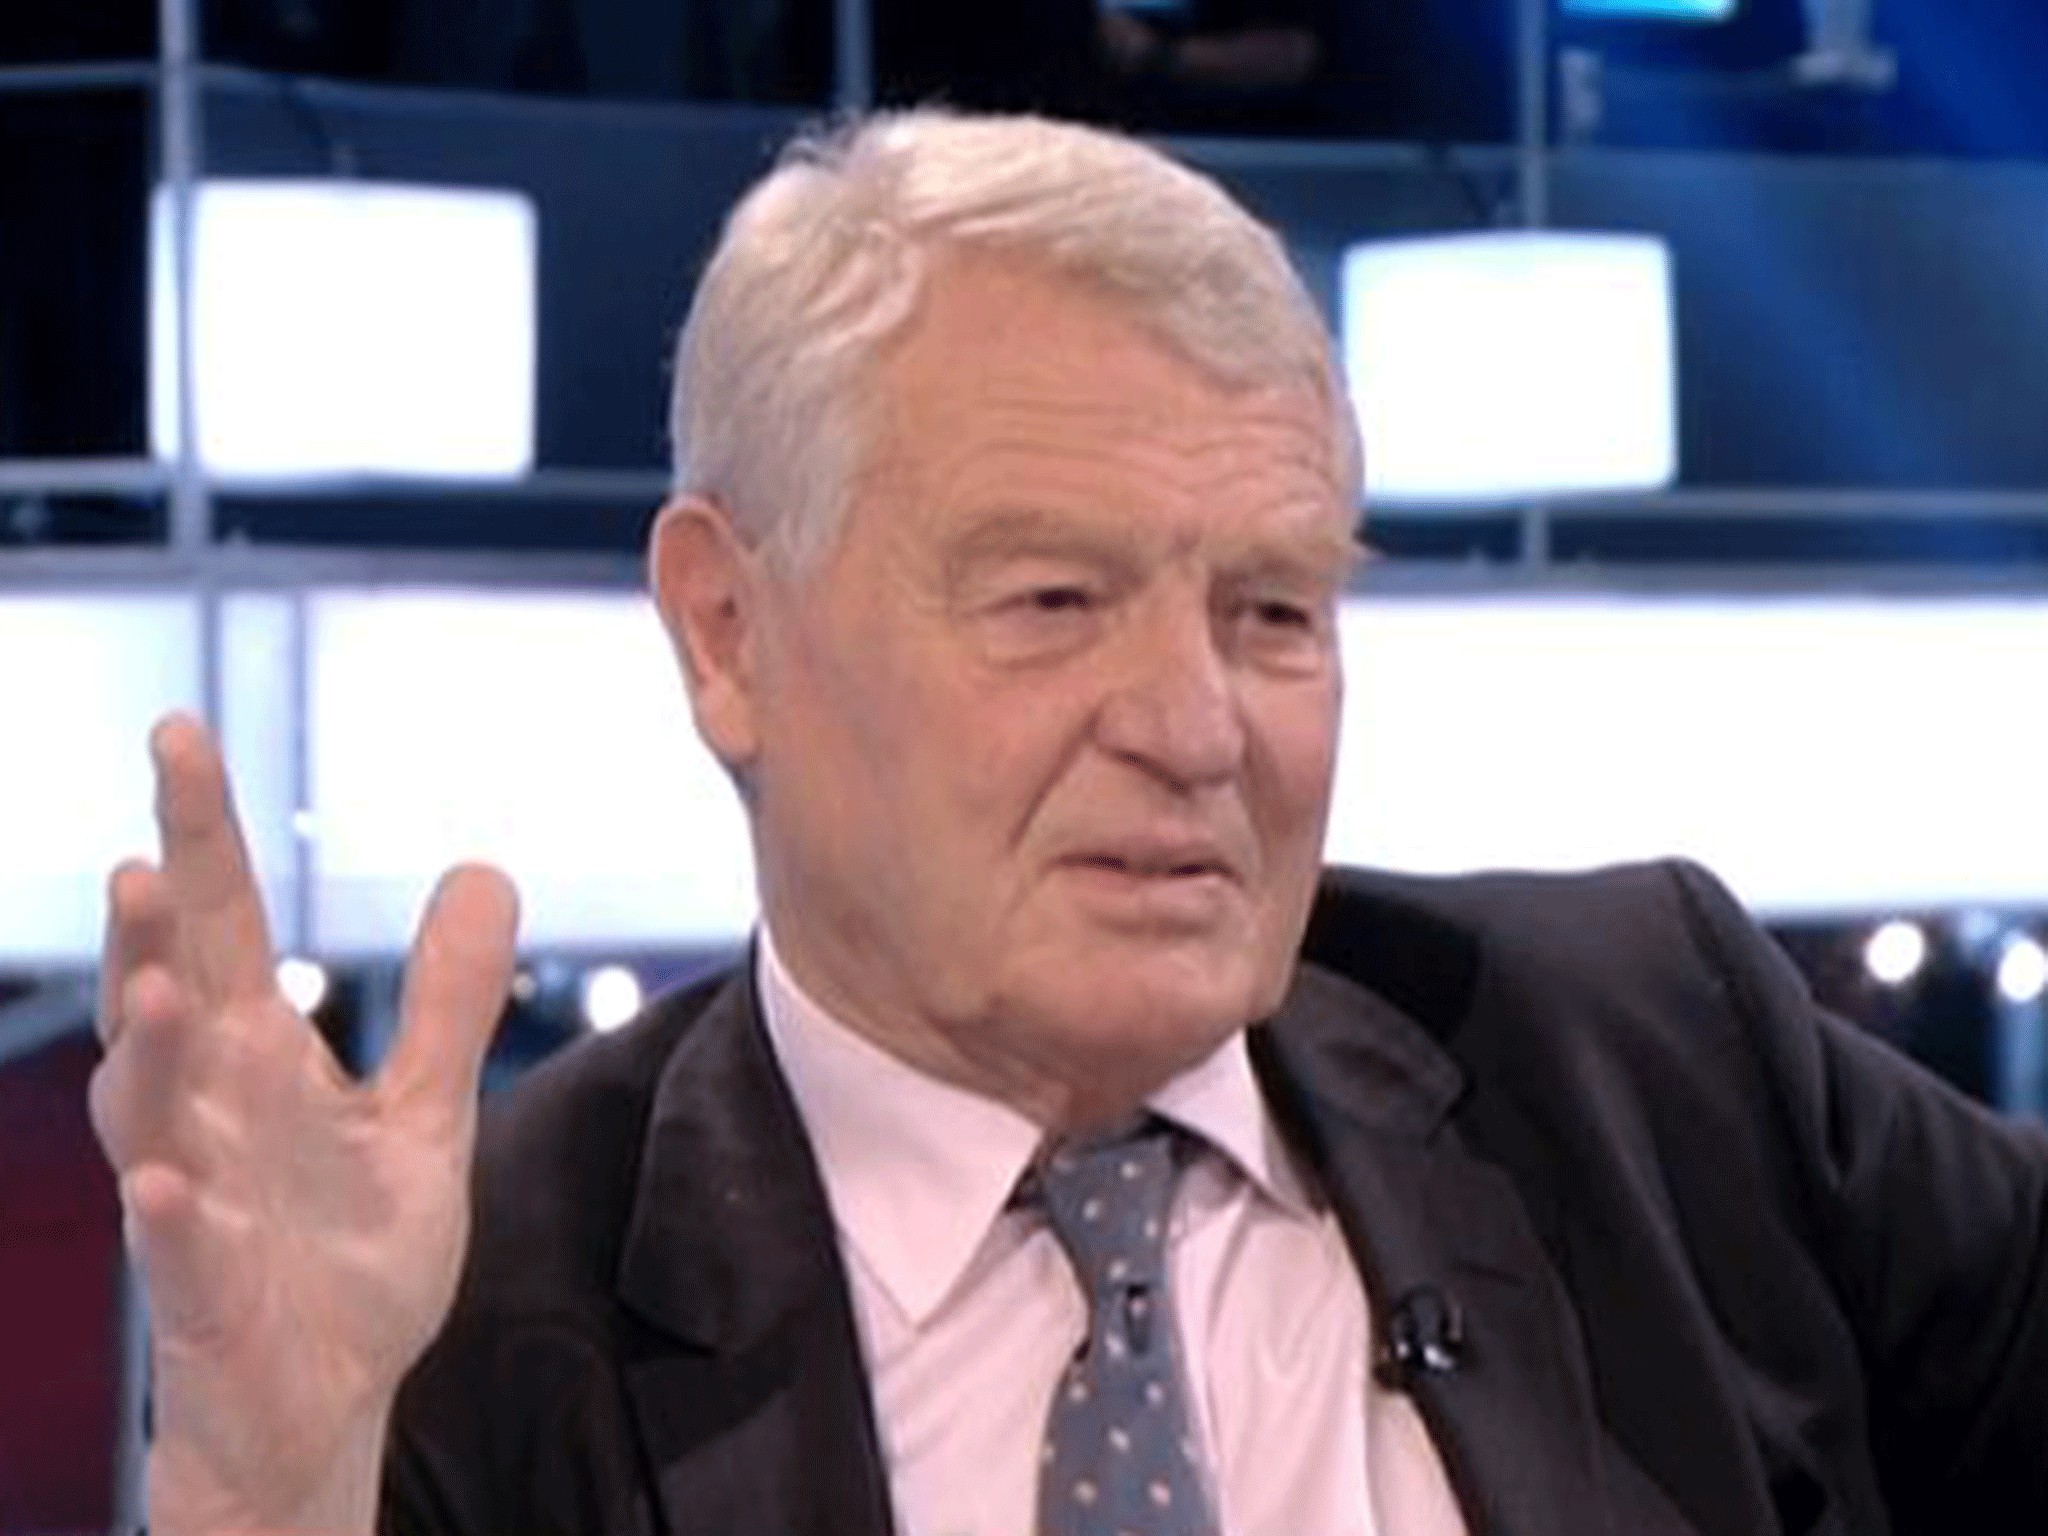 Paddy Ashdown speaks to Andrew Neil on the BBC about the exit poll on election night